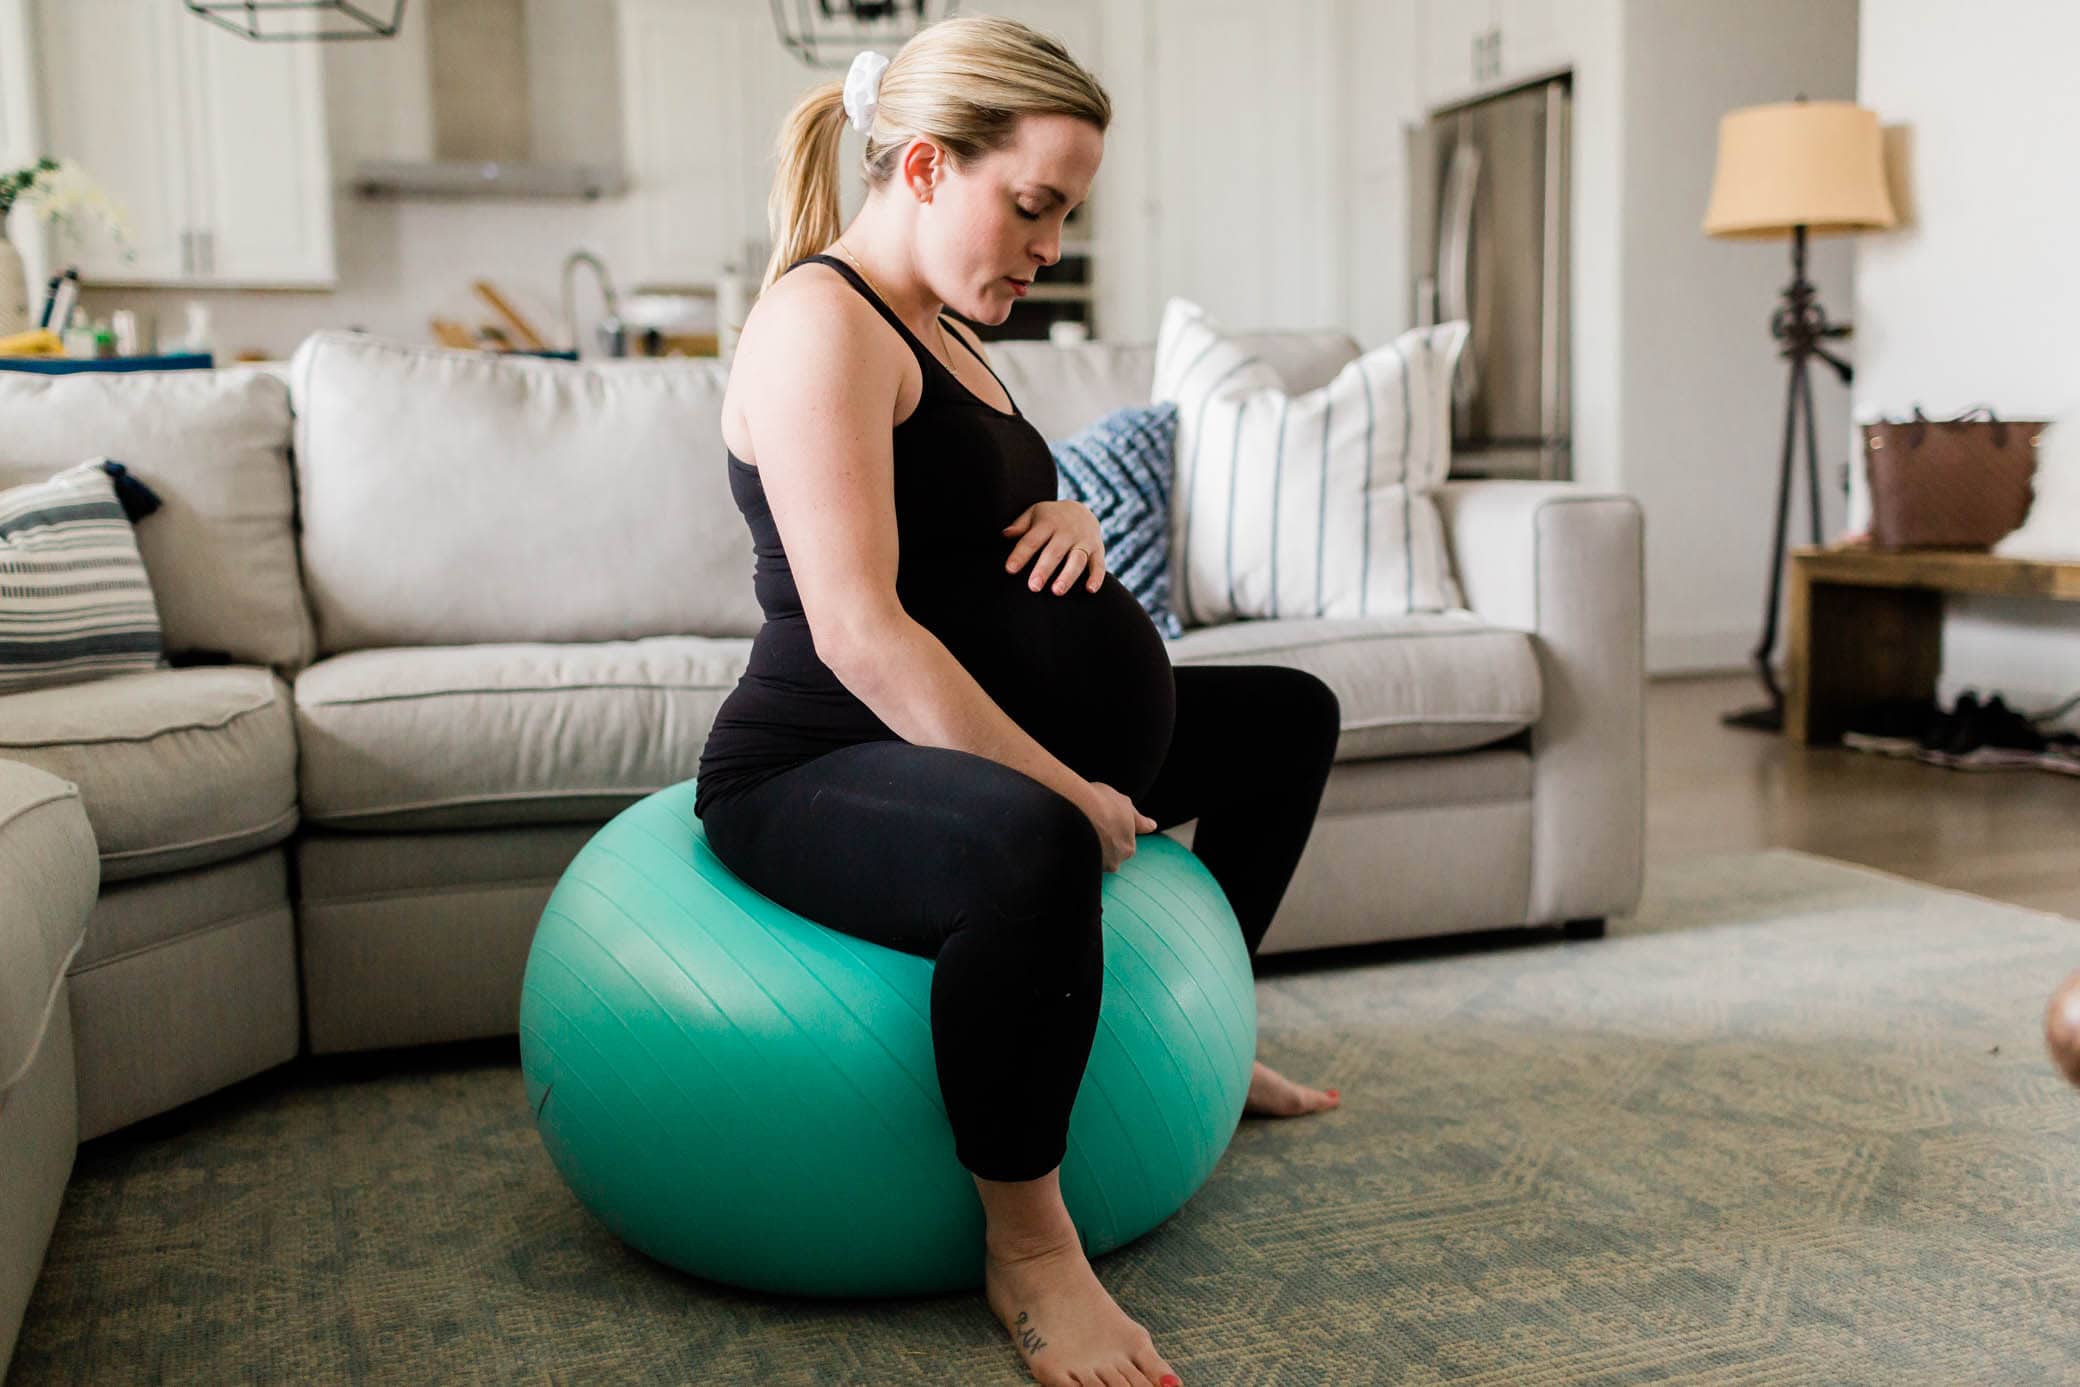 Pregnant woman sitting on a birthing ball in her living room.